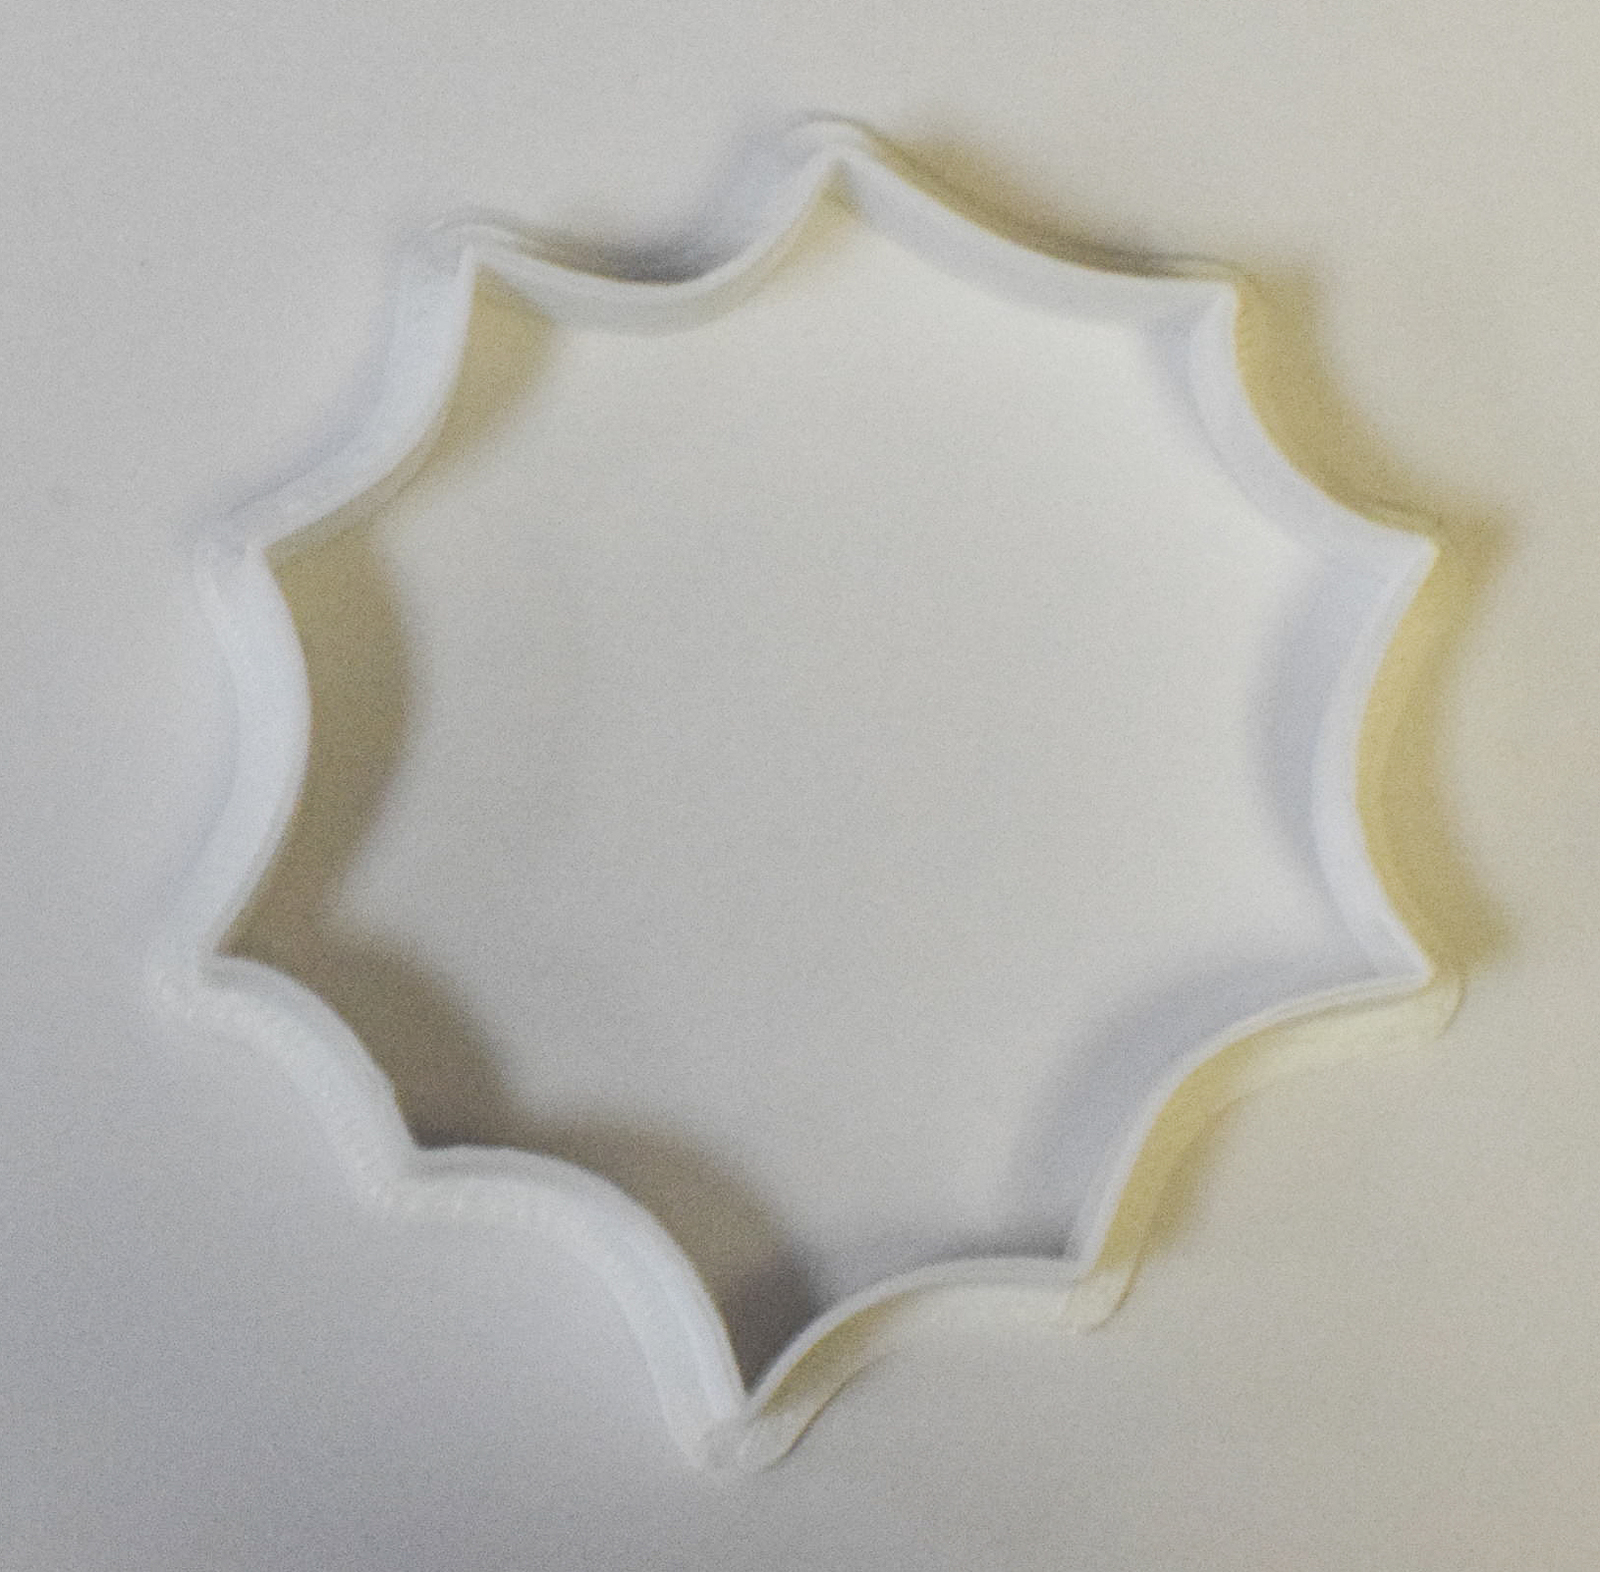 Spider Web Halloween Scary Fall Cookie Cutter Baking Tool 3D Printed USA PR318